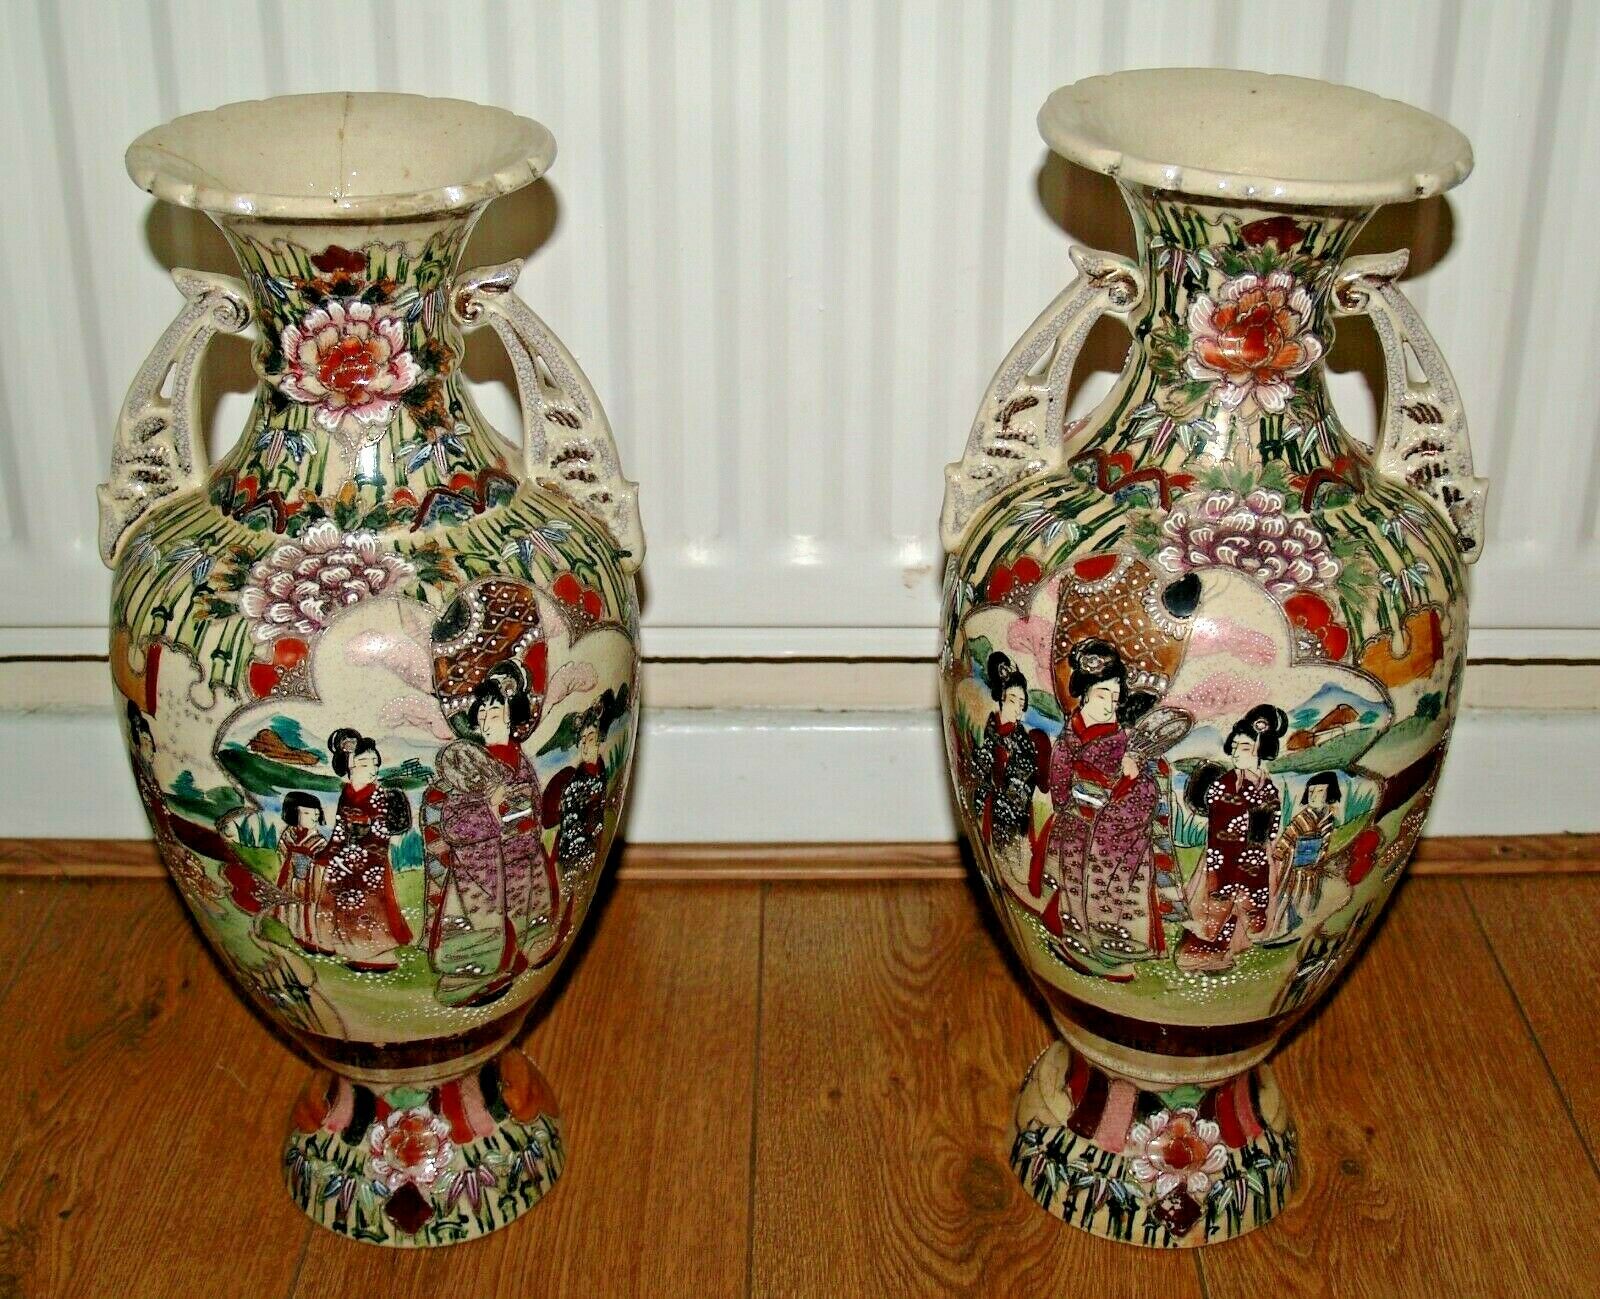 Antique Valuations: Large matched pair of antique Japanese Early Taisho Period satsuma vases